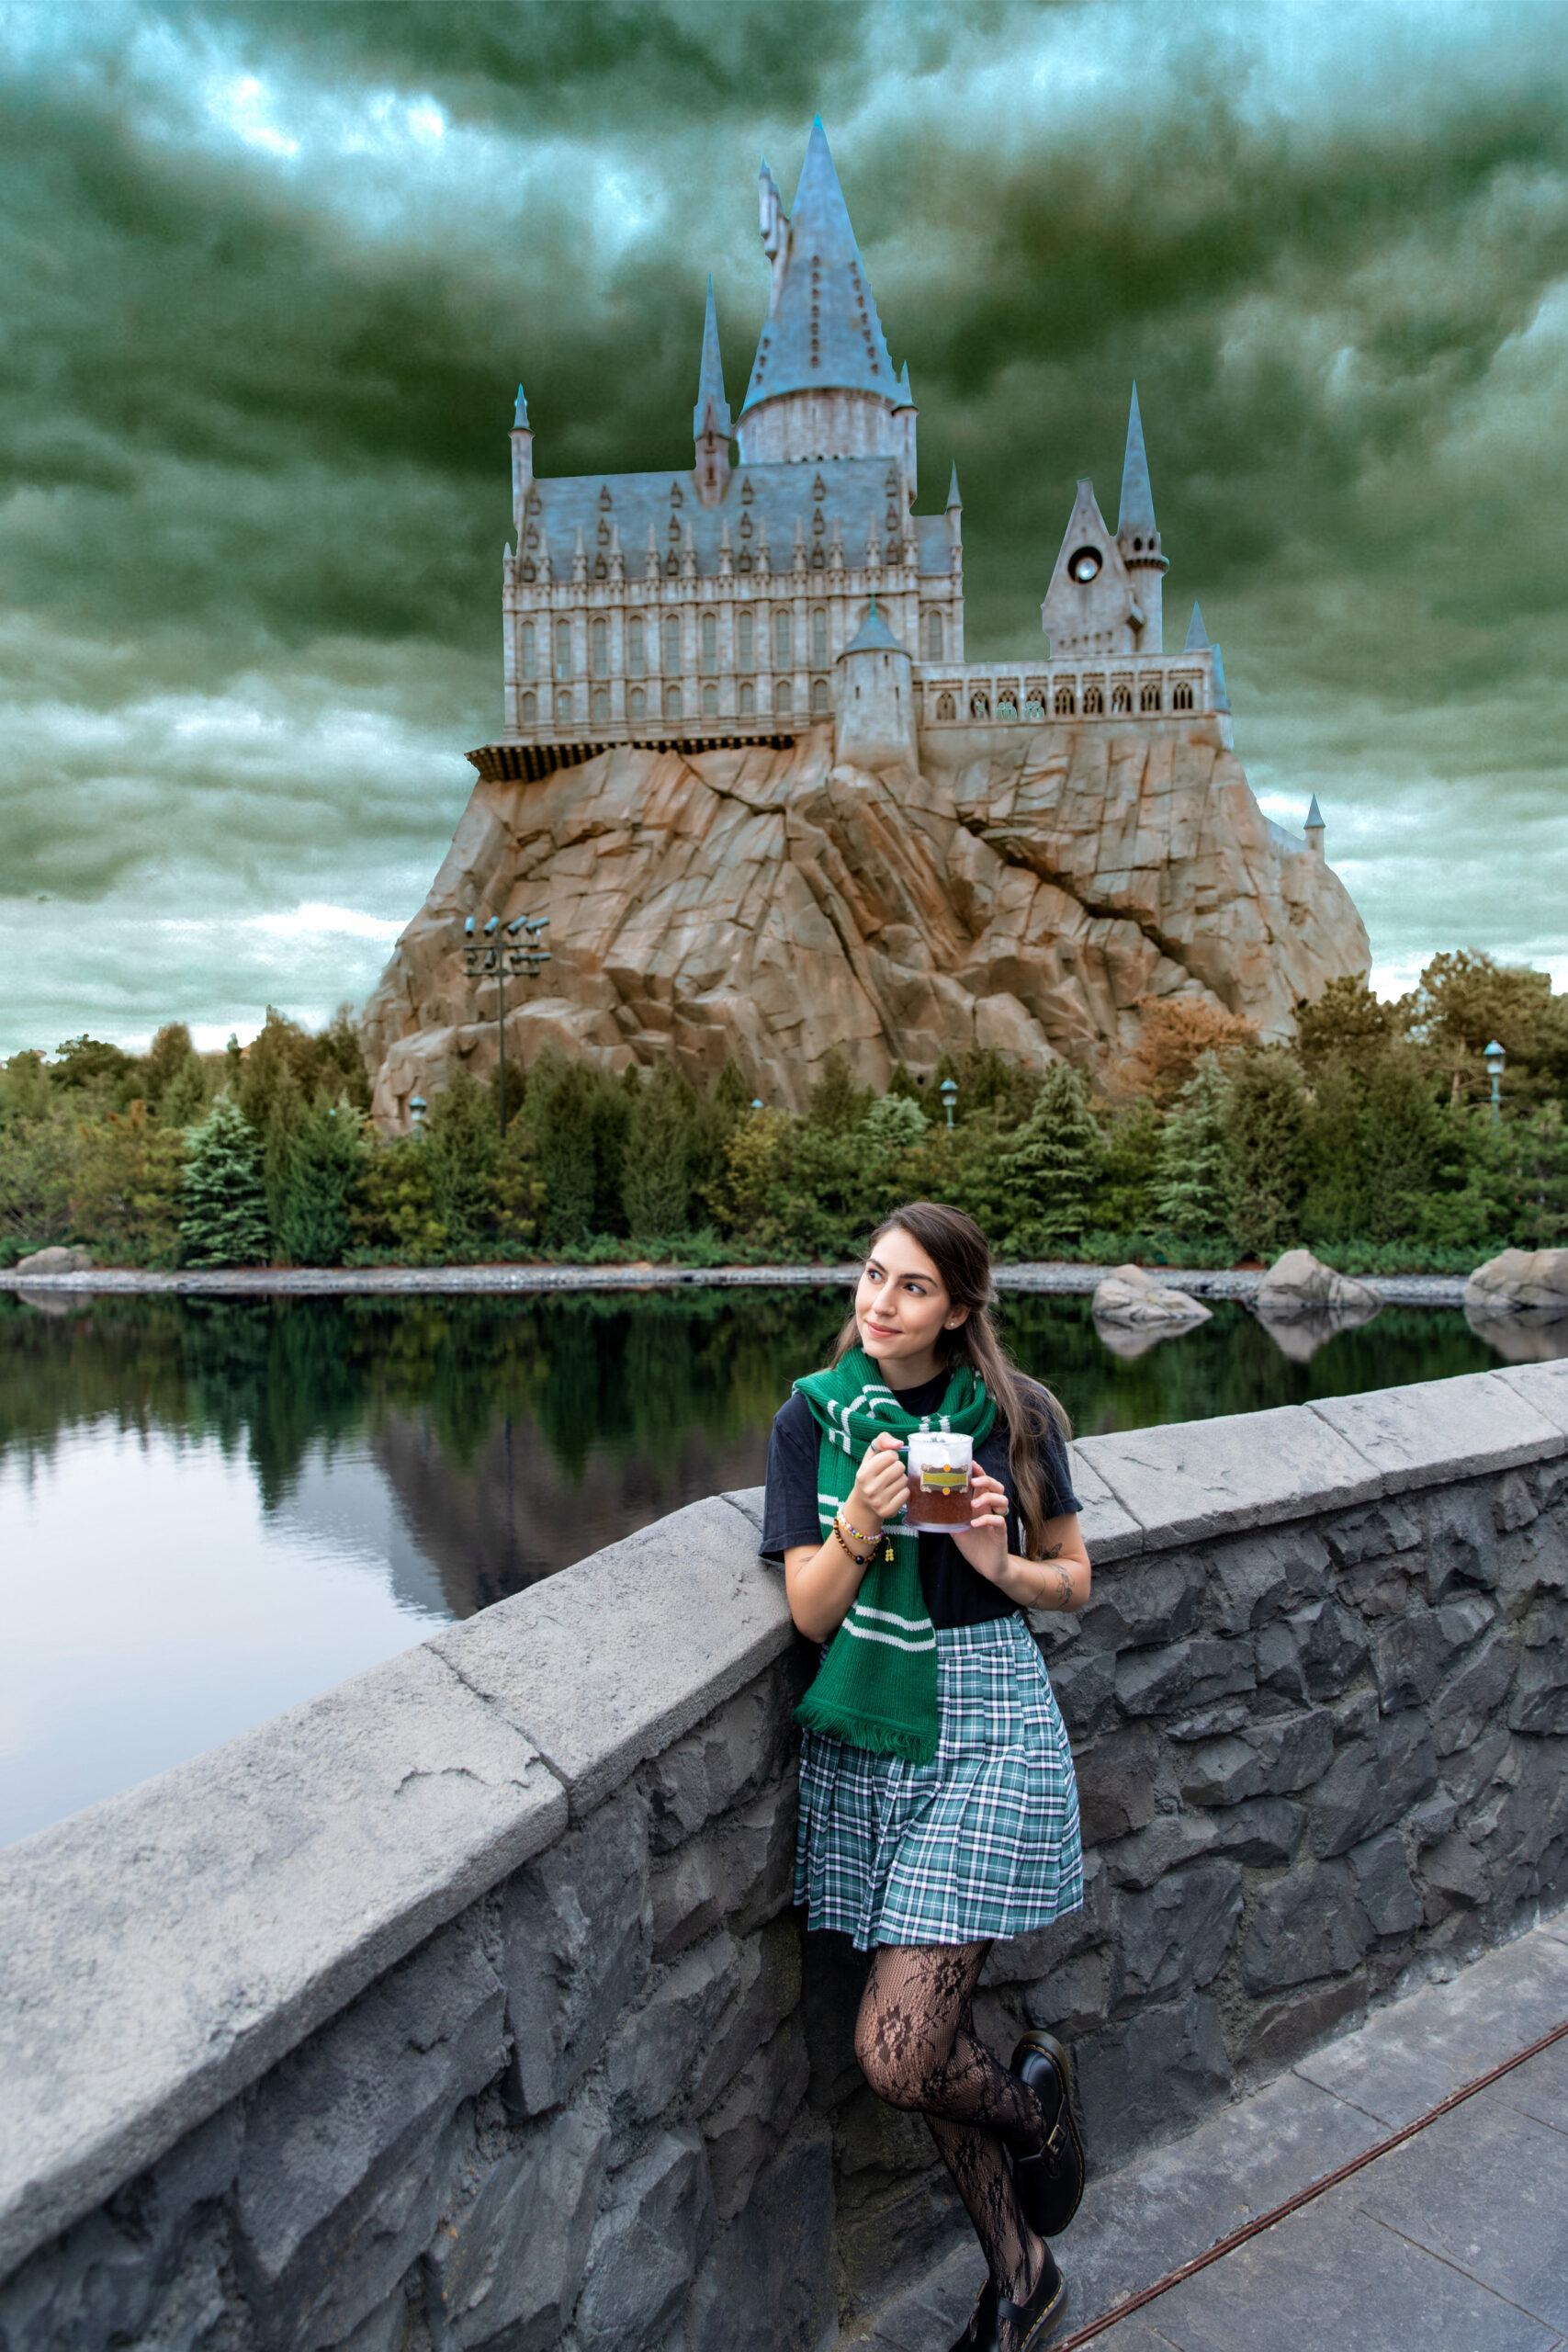 Andrea posing in front of Hogwarts with butterbeer